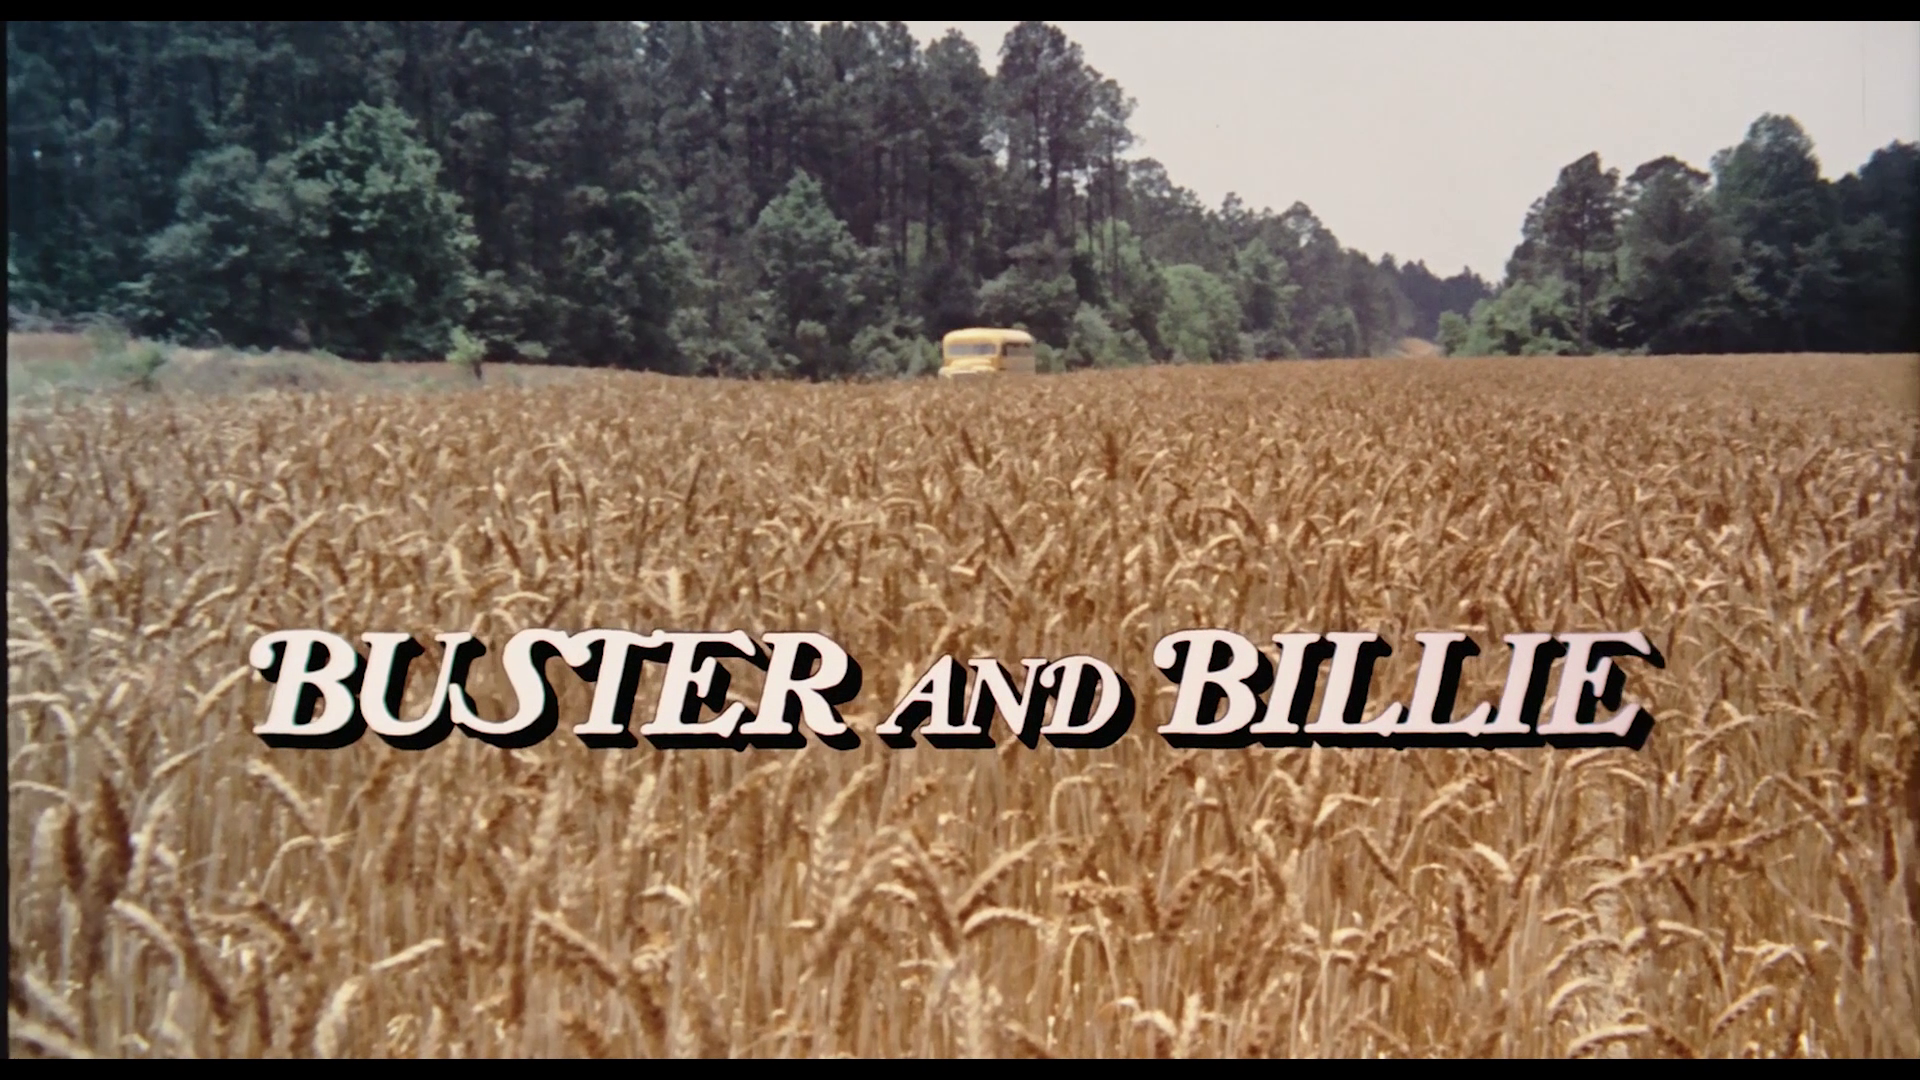 Buster and Billie 1974 long movie trailer hd Jan Michael Vincent